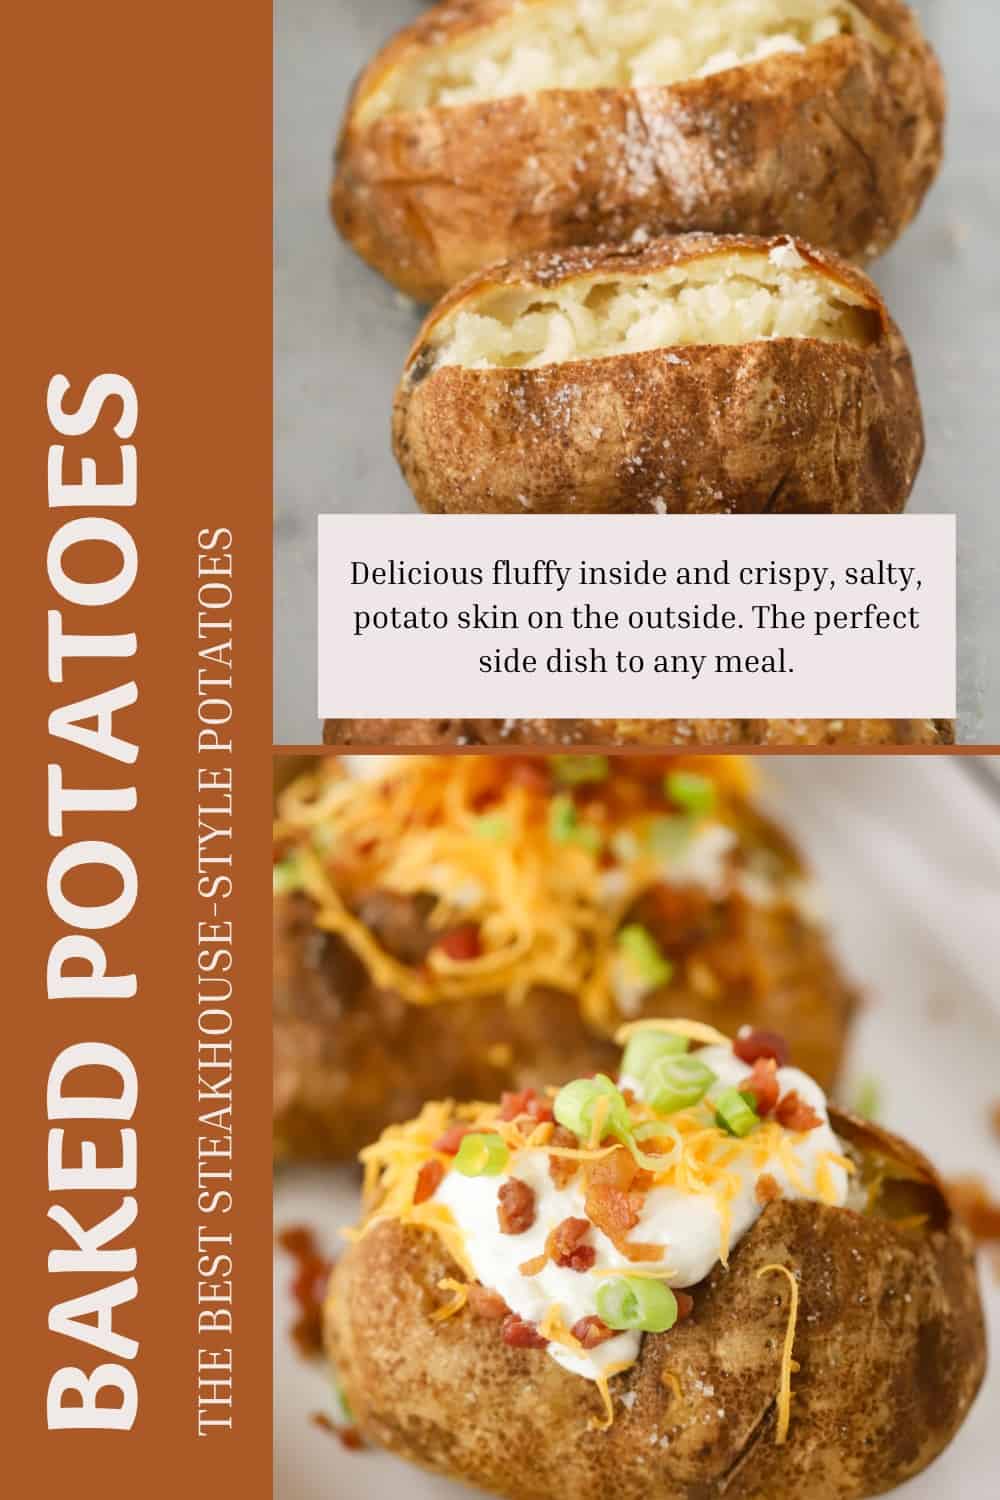 Best Steakhouse Baked Potatoes - The Carefree Kitchen